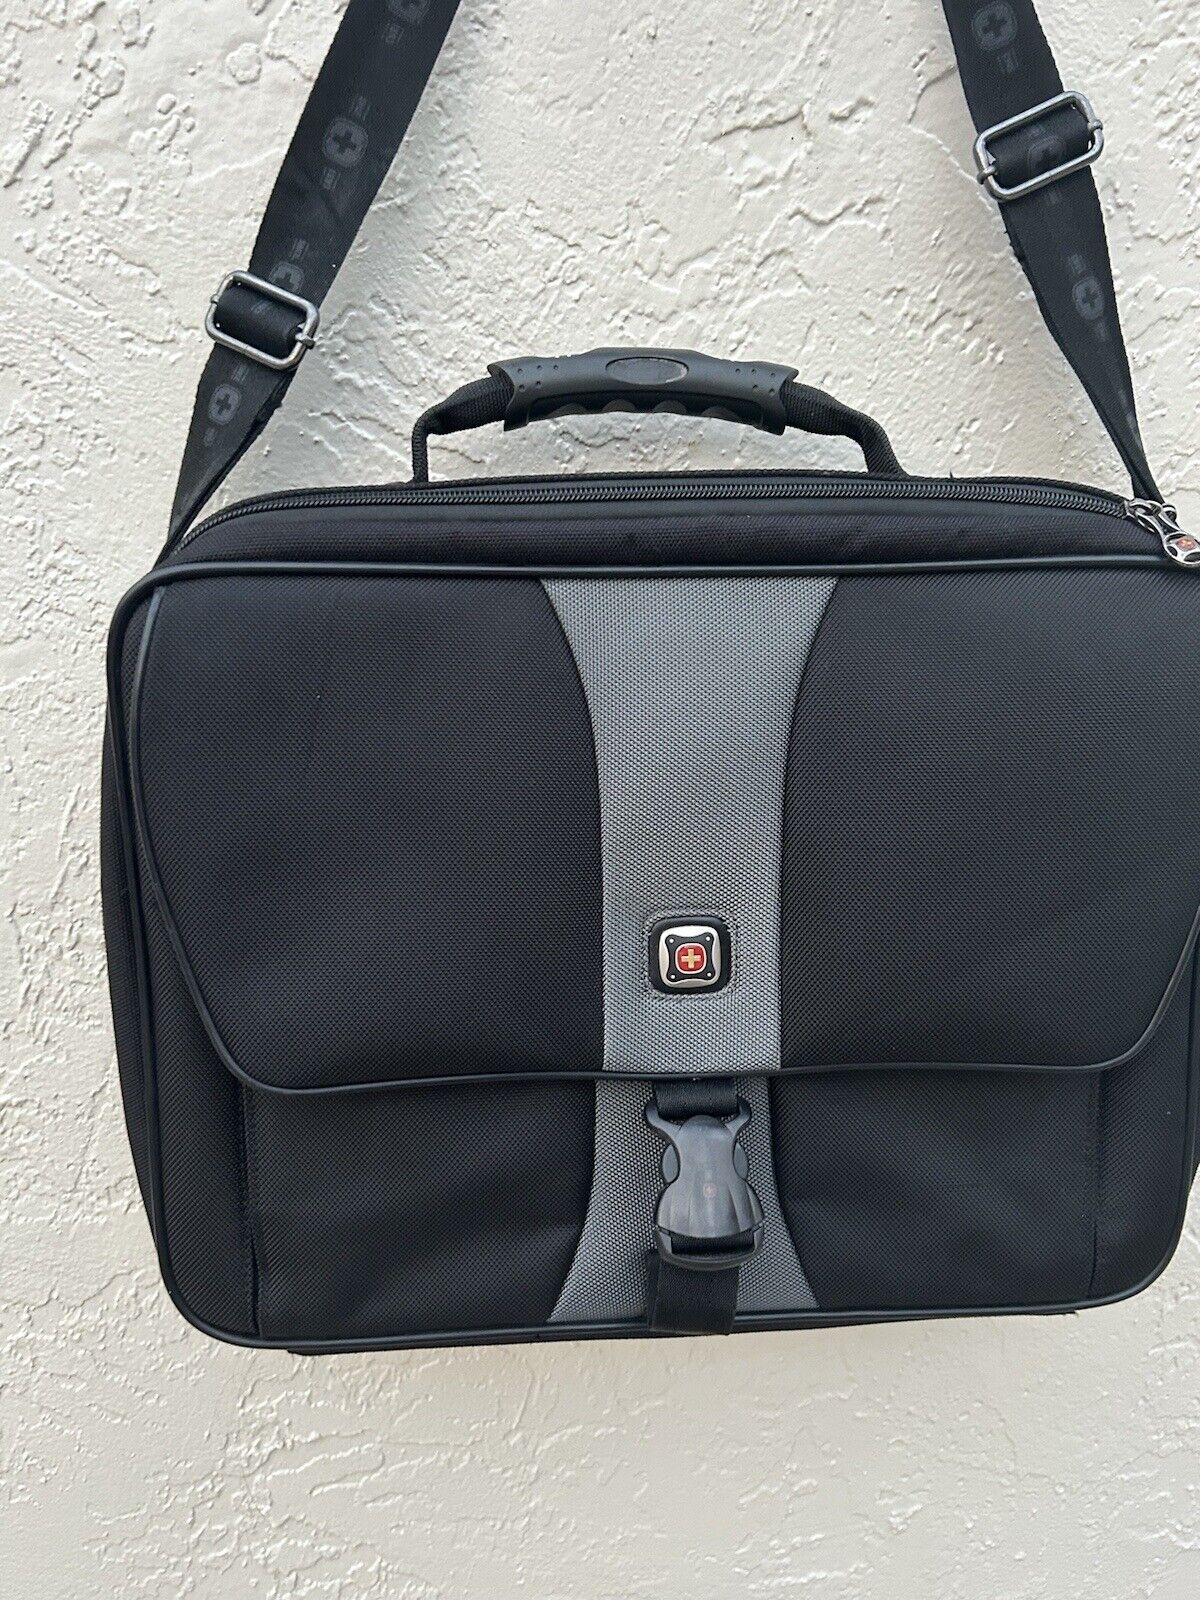 Swissgear By Wenger Messanger and Laptop Bag